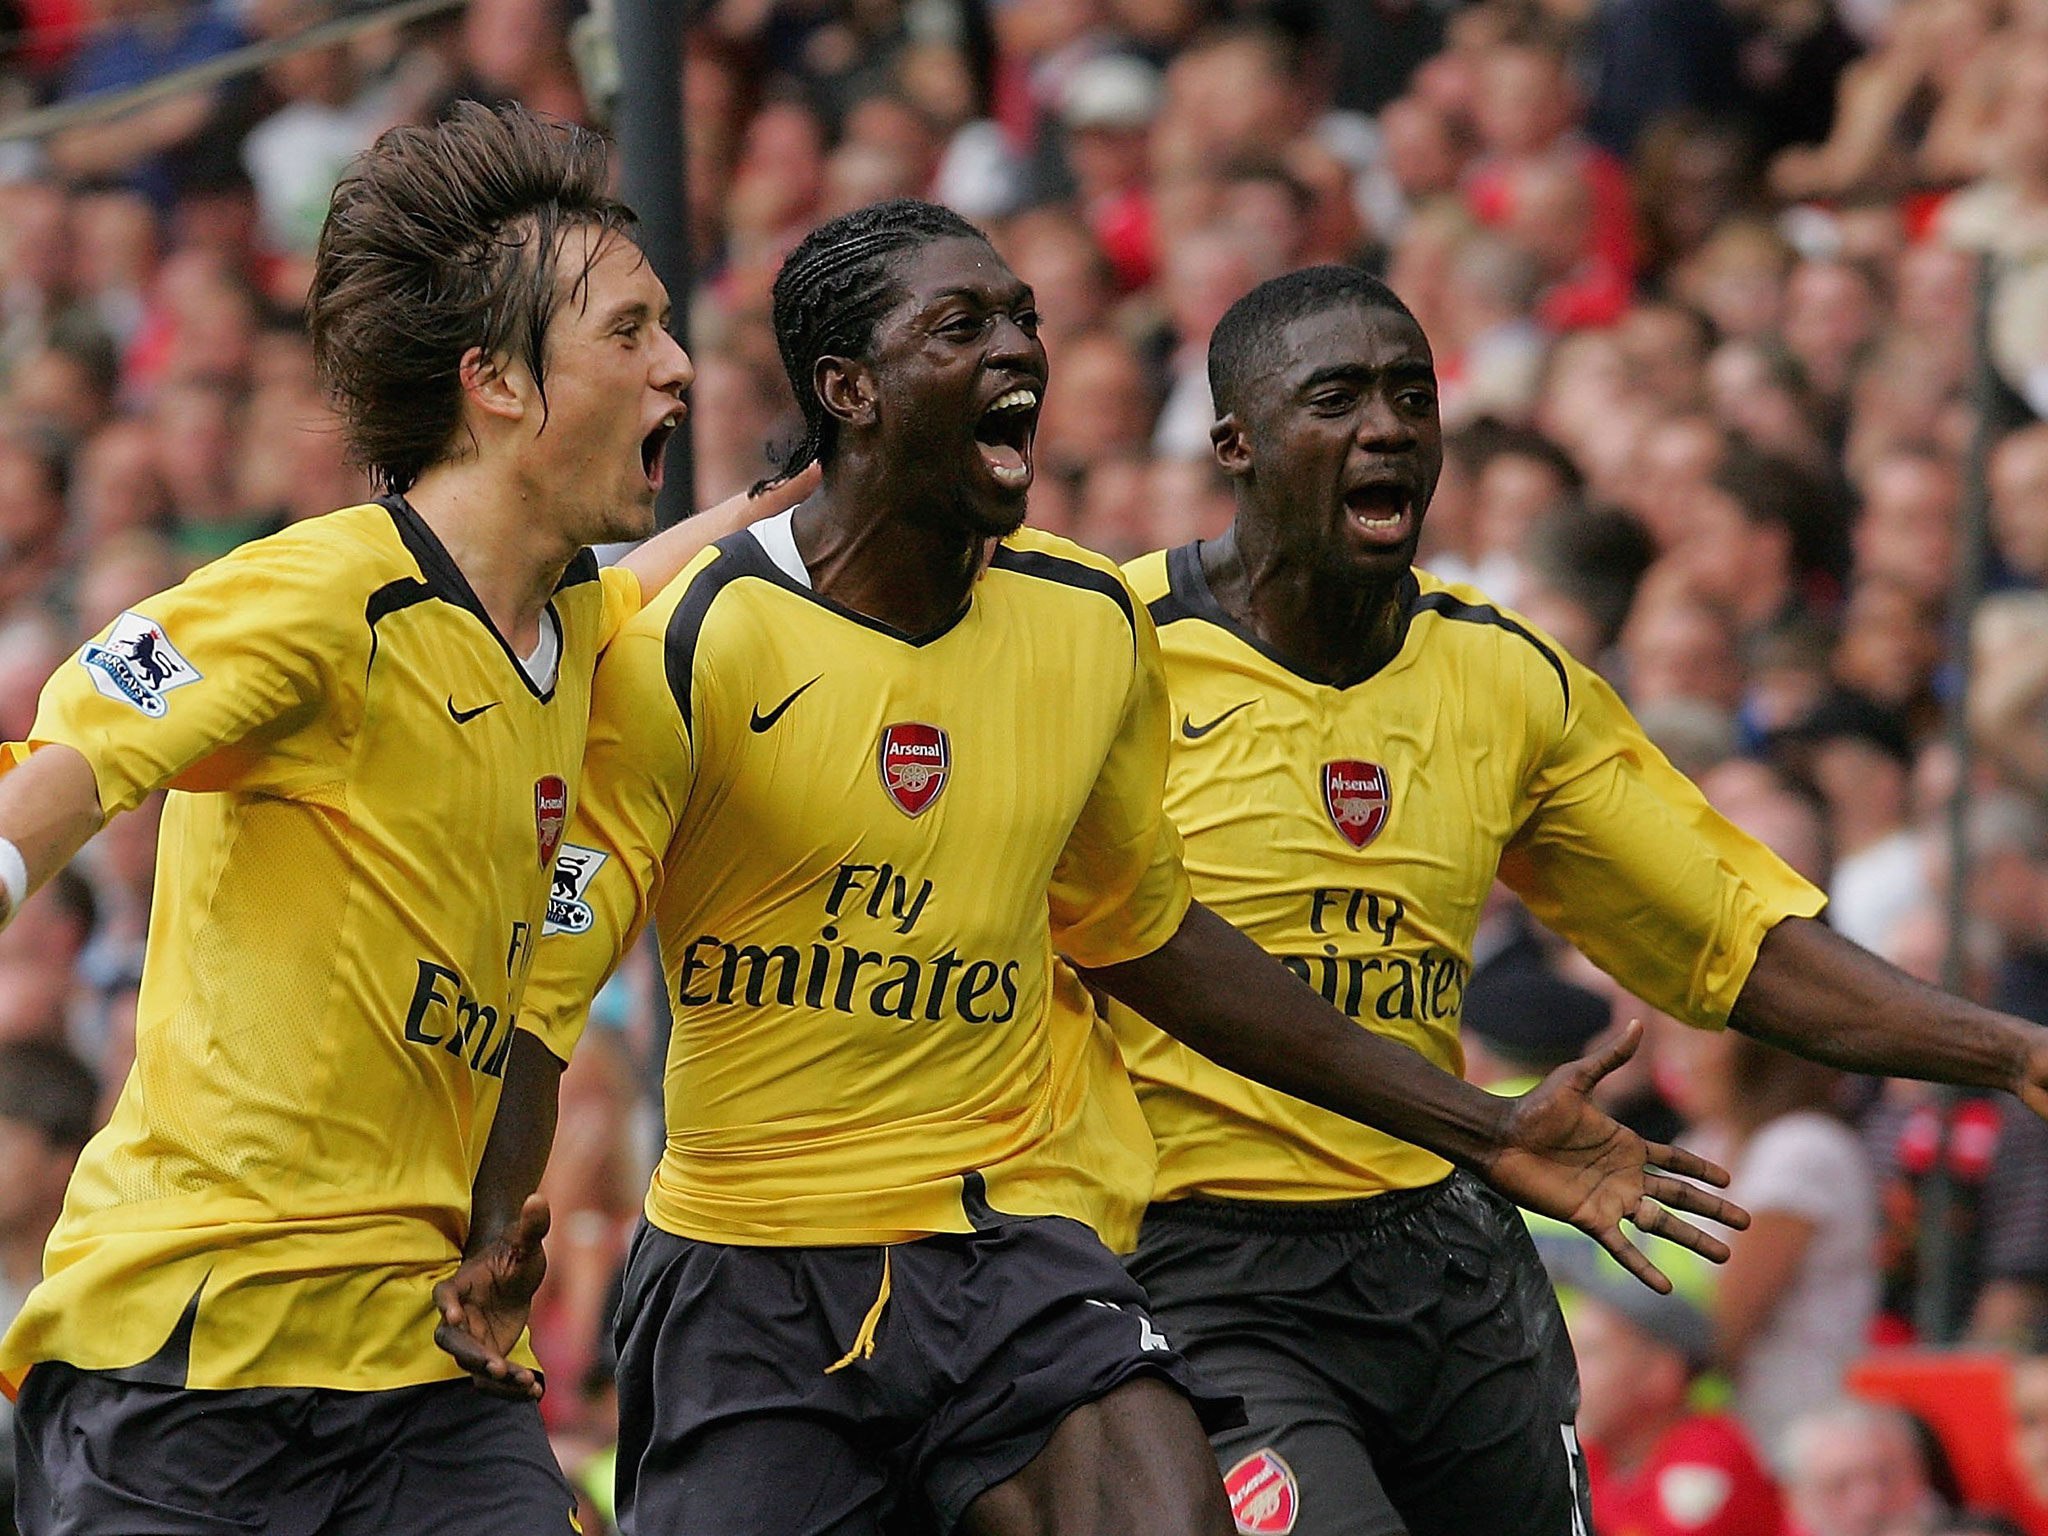 Emmanuel Adebayor's goal was the one and only in a slender 1-0 victory at Old Trafford, back in September 2006. Since then, Arsenal haven't beaten United away from home in the league. (Picture source: The Independent)